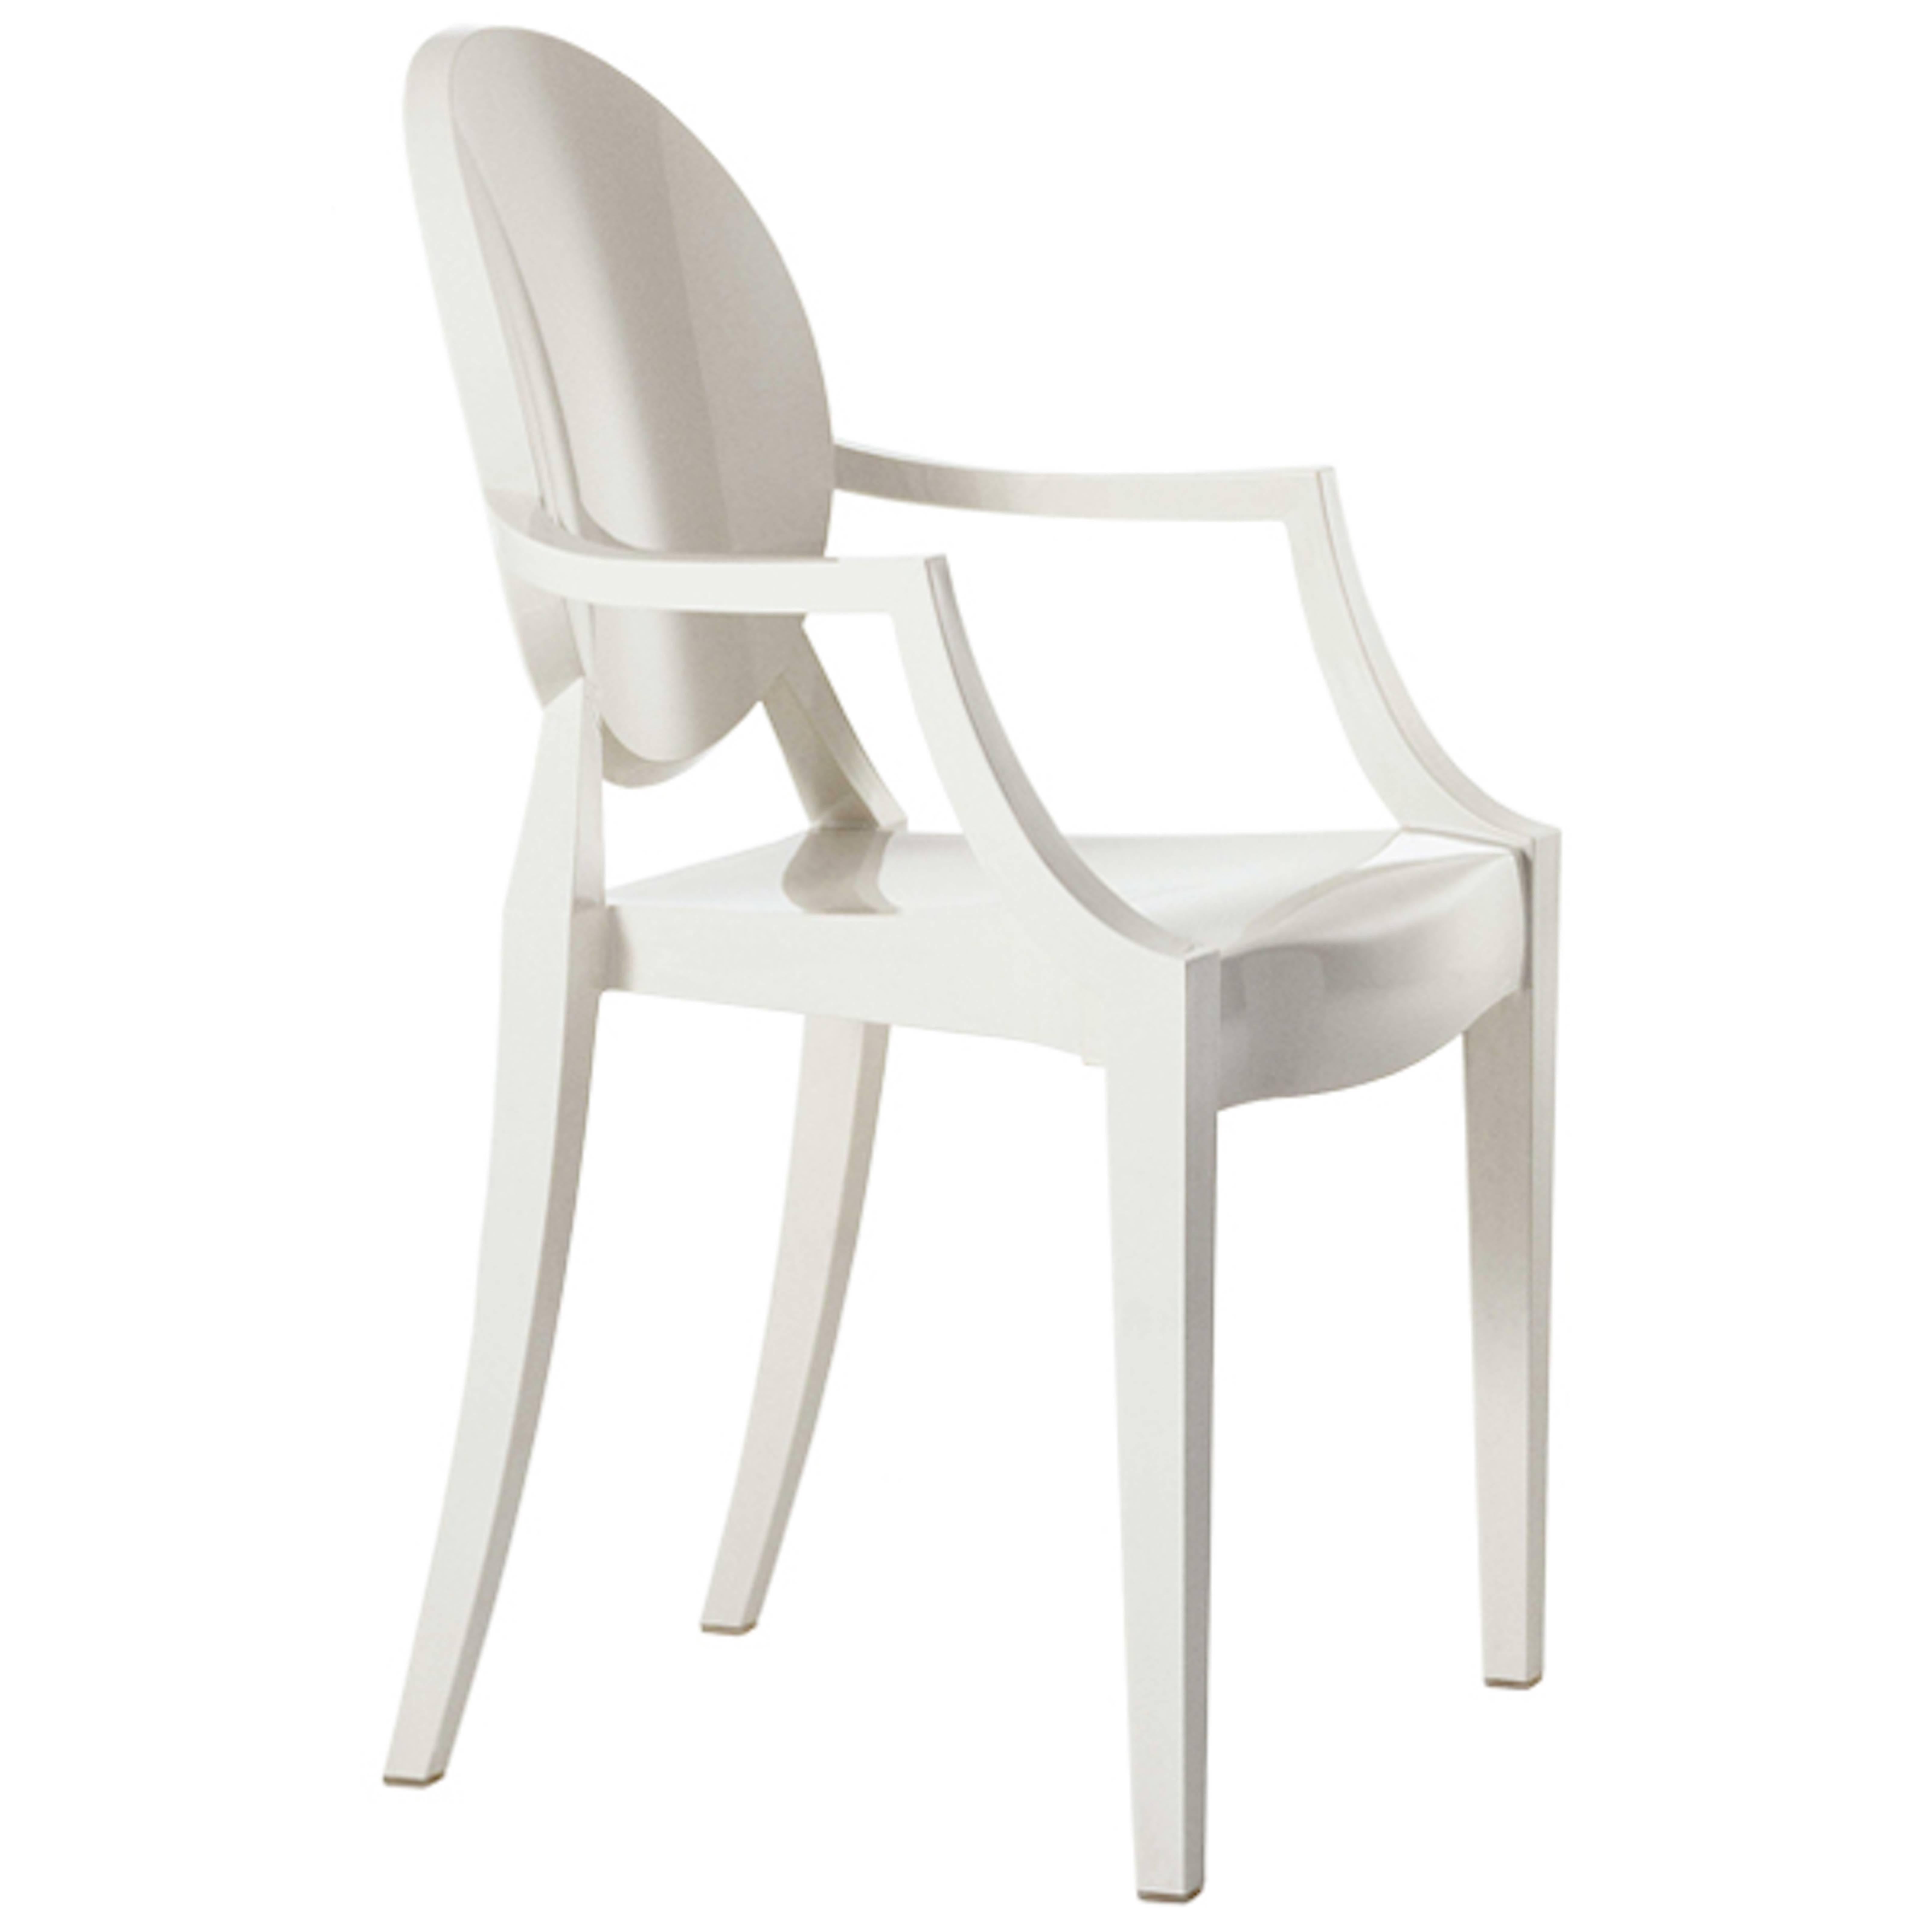 Designed for Kartell in 2002
Polycarbonate glossy white comfortable armchair in the Louis XVI style
Stable and durable, shock and weather resistant 
Good condition
Dimensions: 37